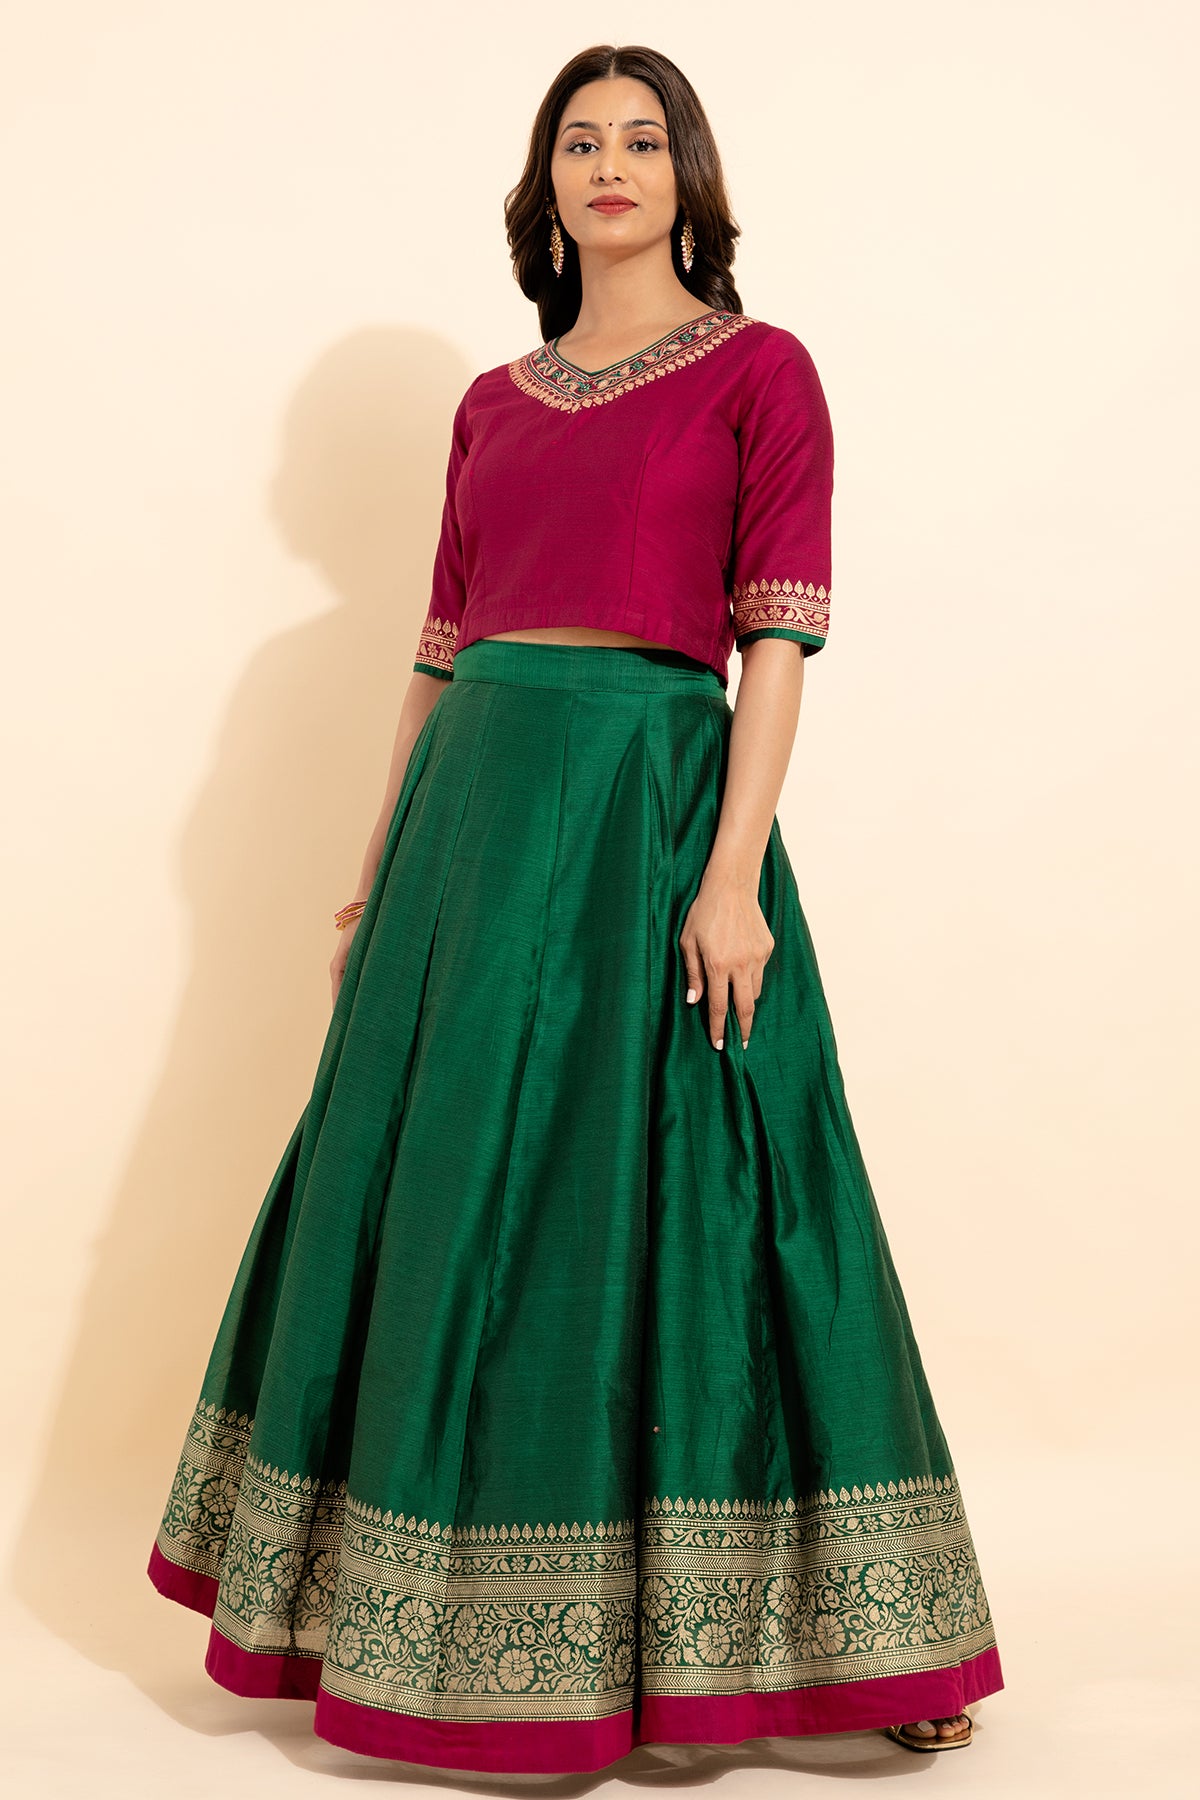 Jewel Embroidered Neckline Top With Floral Printed Skirt Set - Magenta & Green